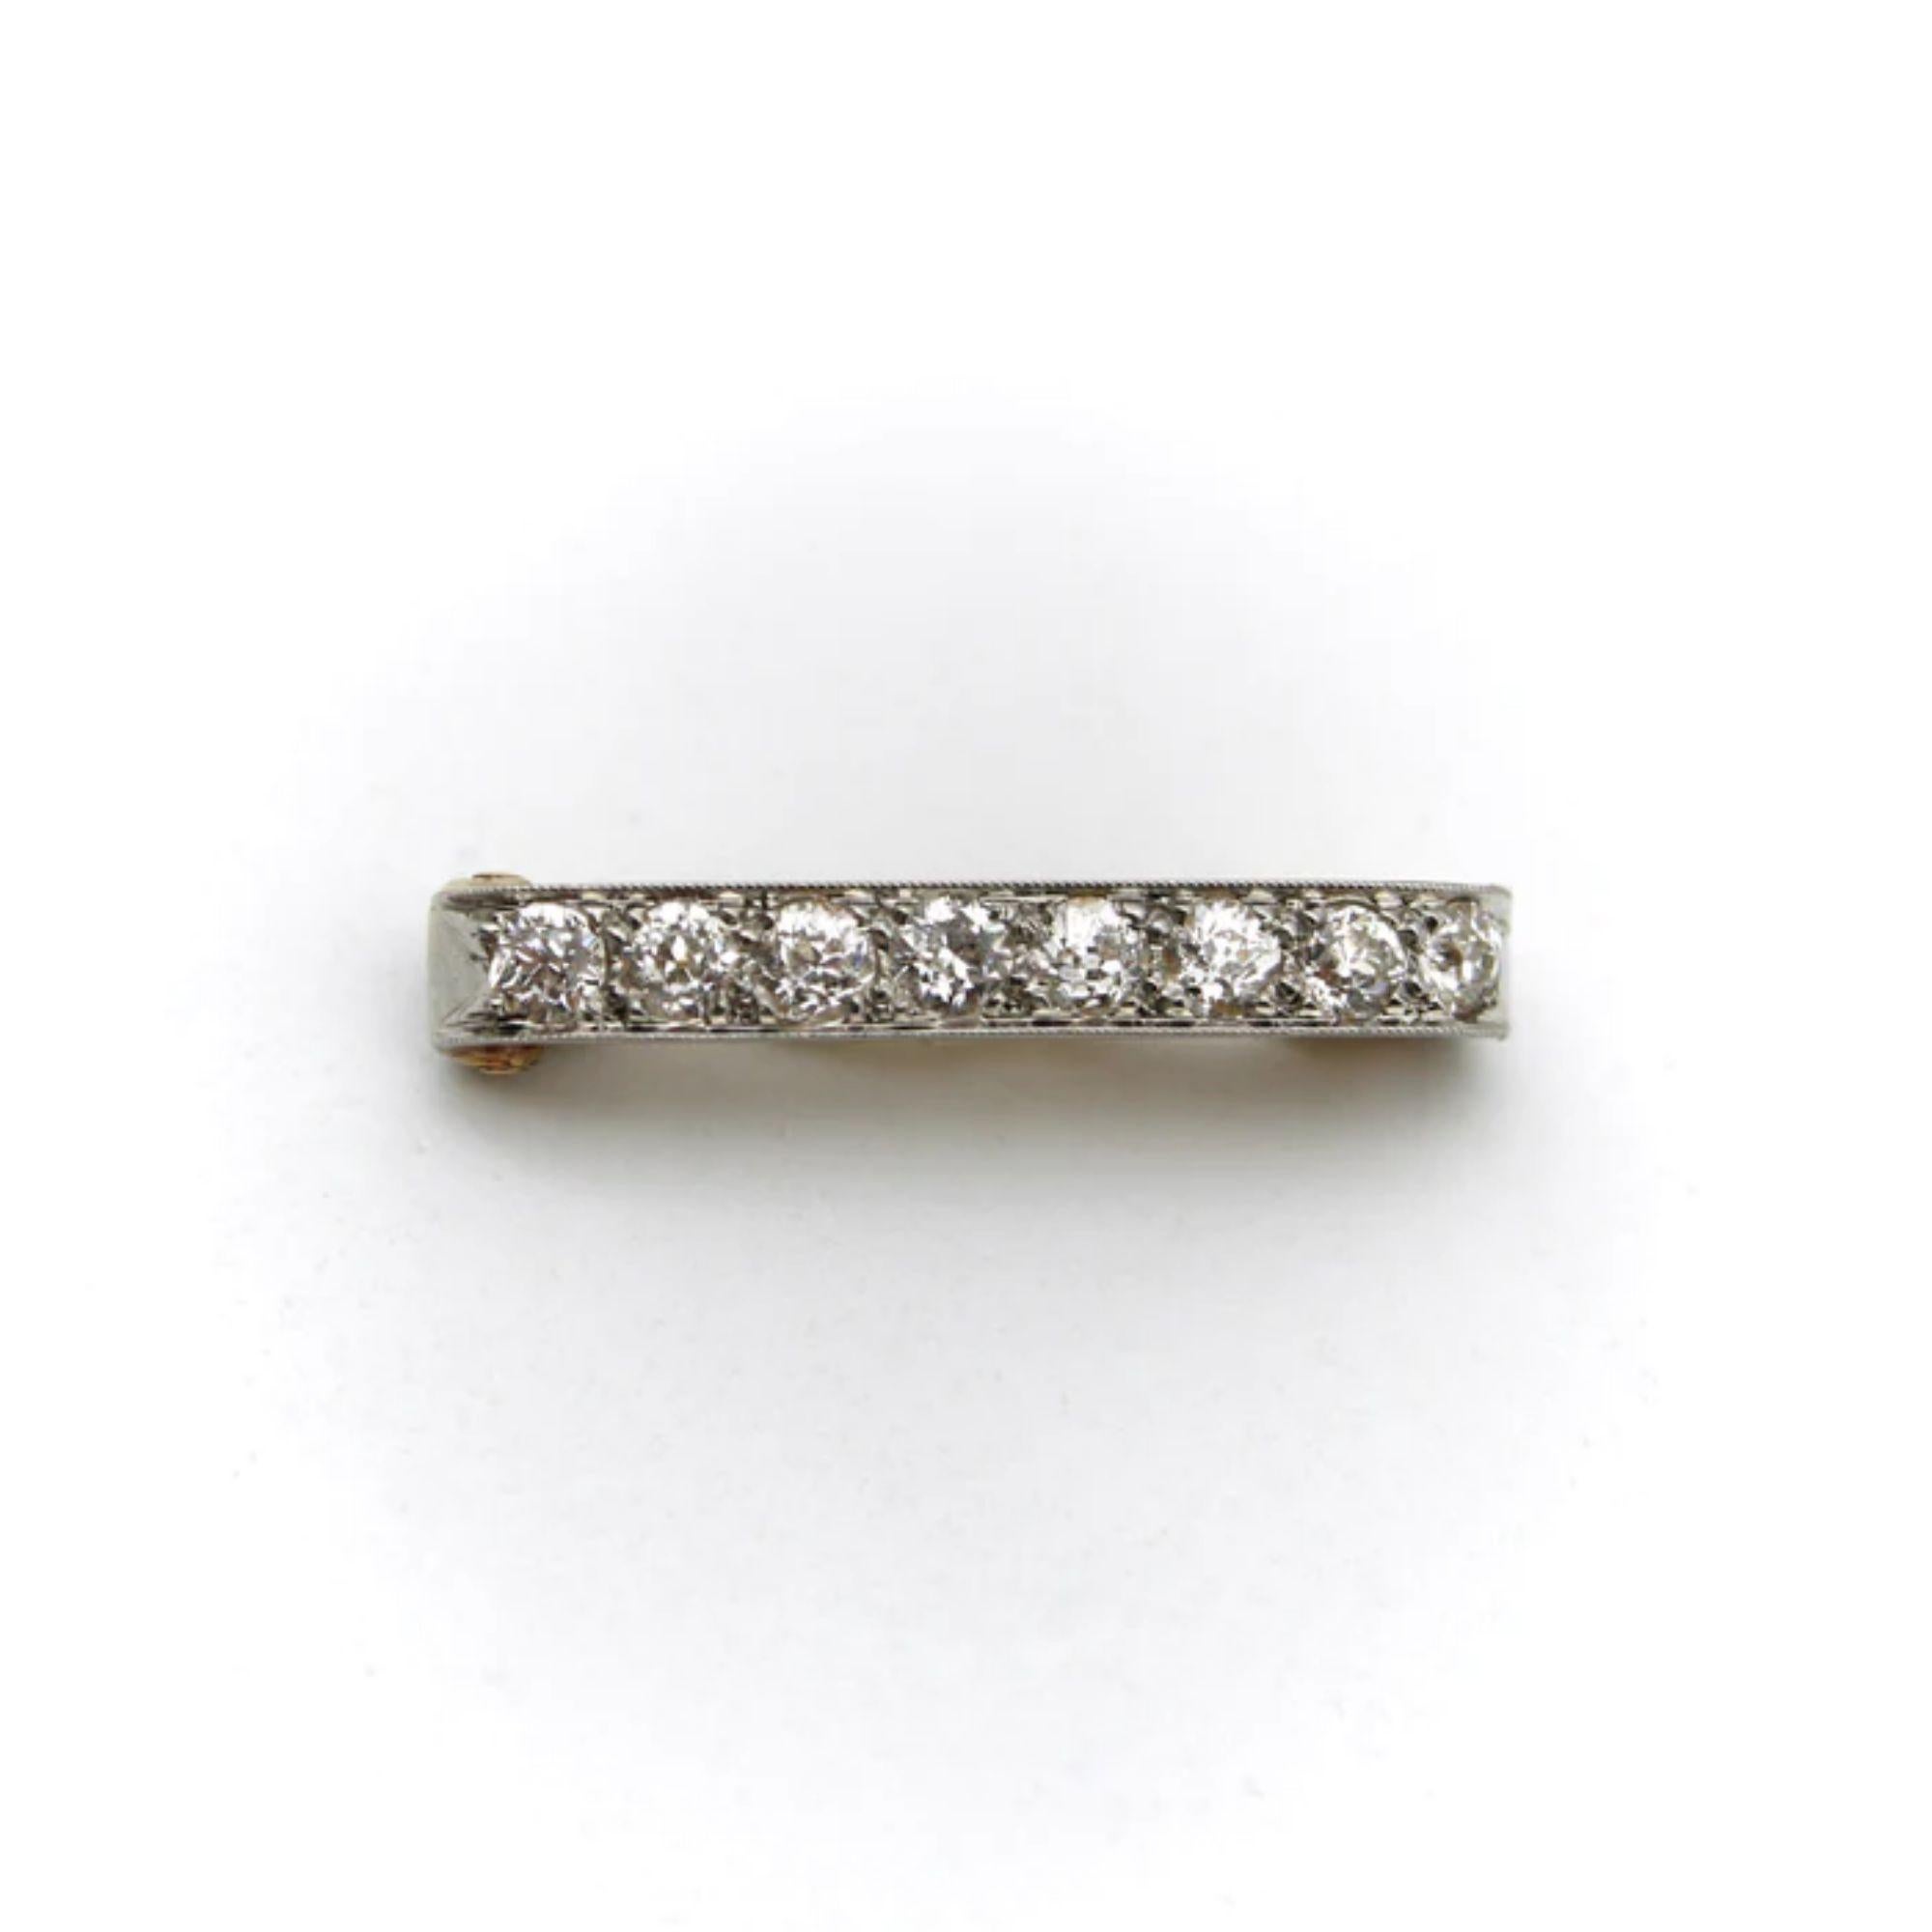 14K Gold Platinum Topped Old Mine Cut Diamond Bar Pin

This Edwardian 14k gold bar pin is platinum topped with a line of diamonds bead set and surrounded by milgrain work. The tightly packed chunky diamonds catch the light beautifully, and the